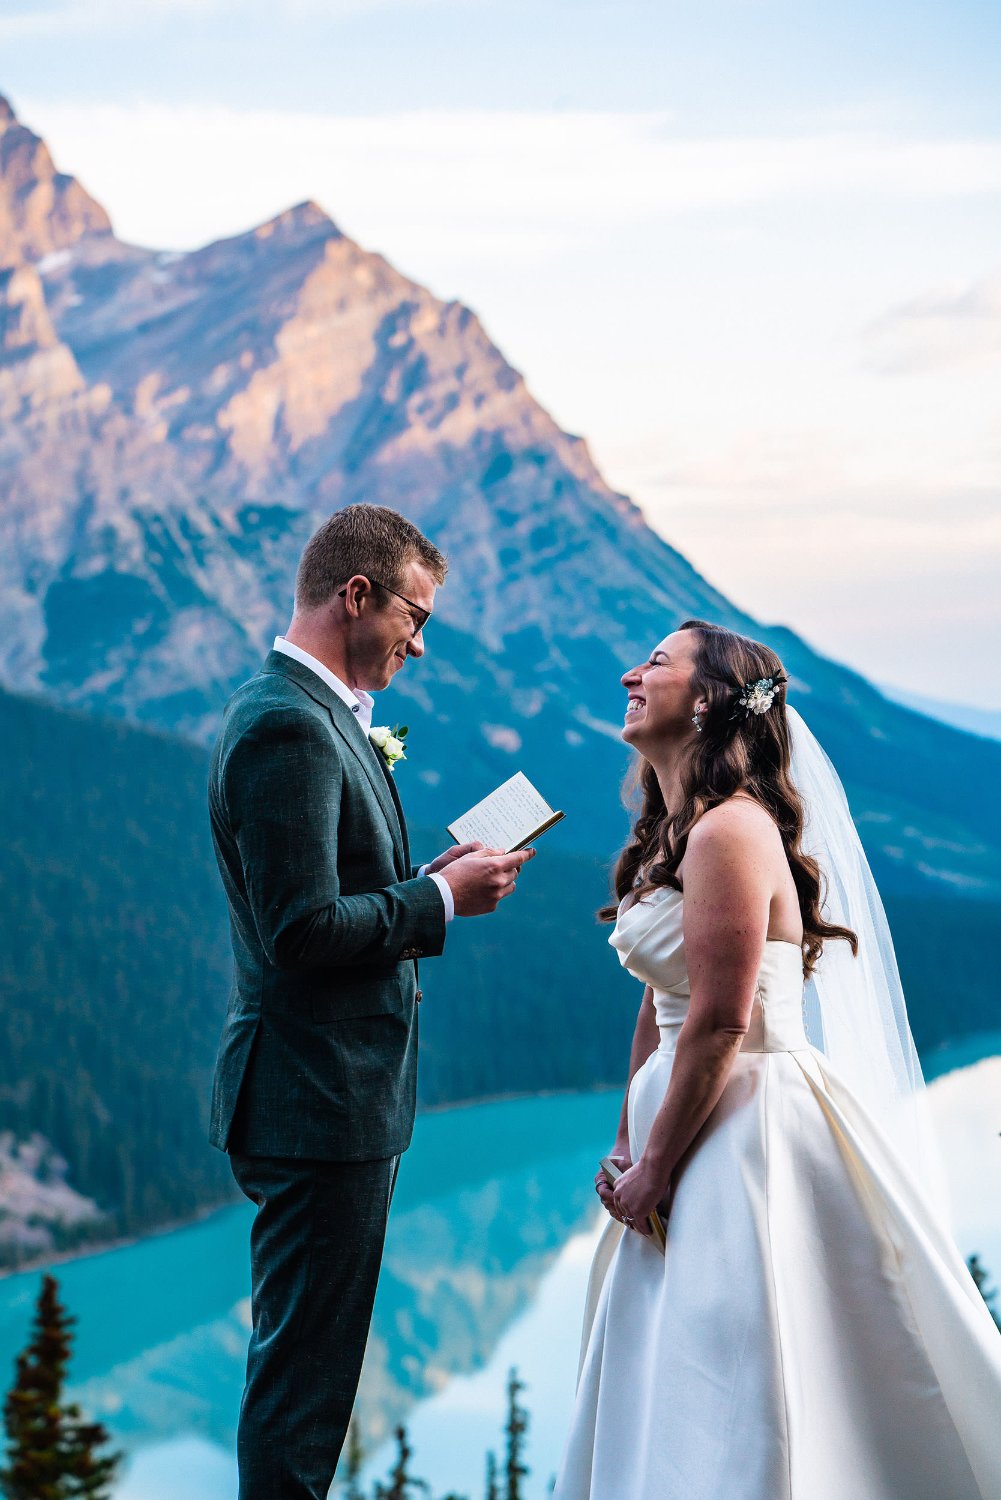 A bride and groom capture their heartfelt elopement vows on top of a mountain overlooking a picturesque lake.